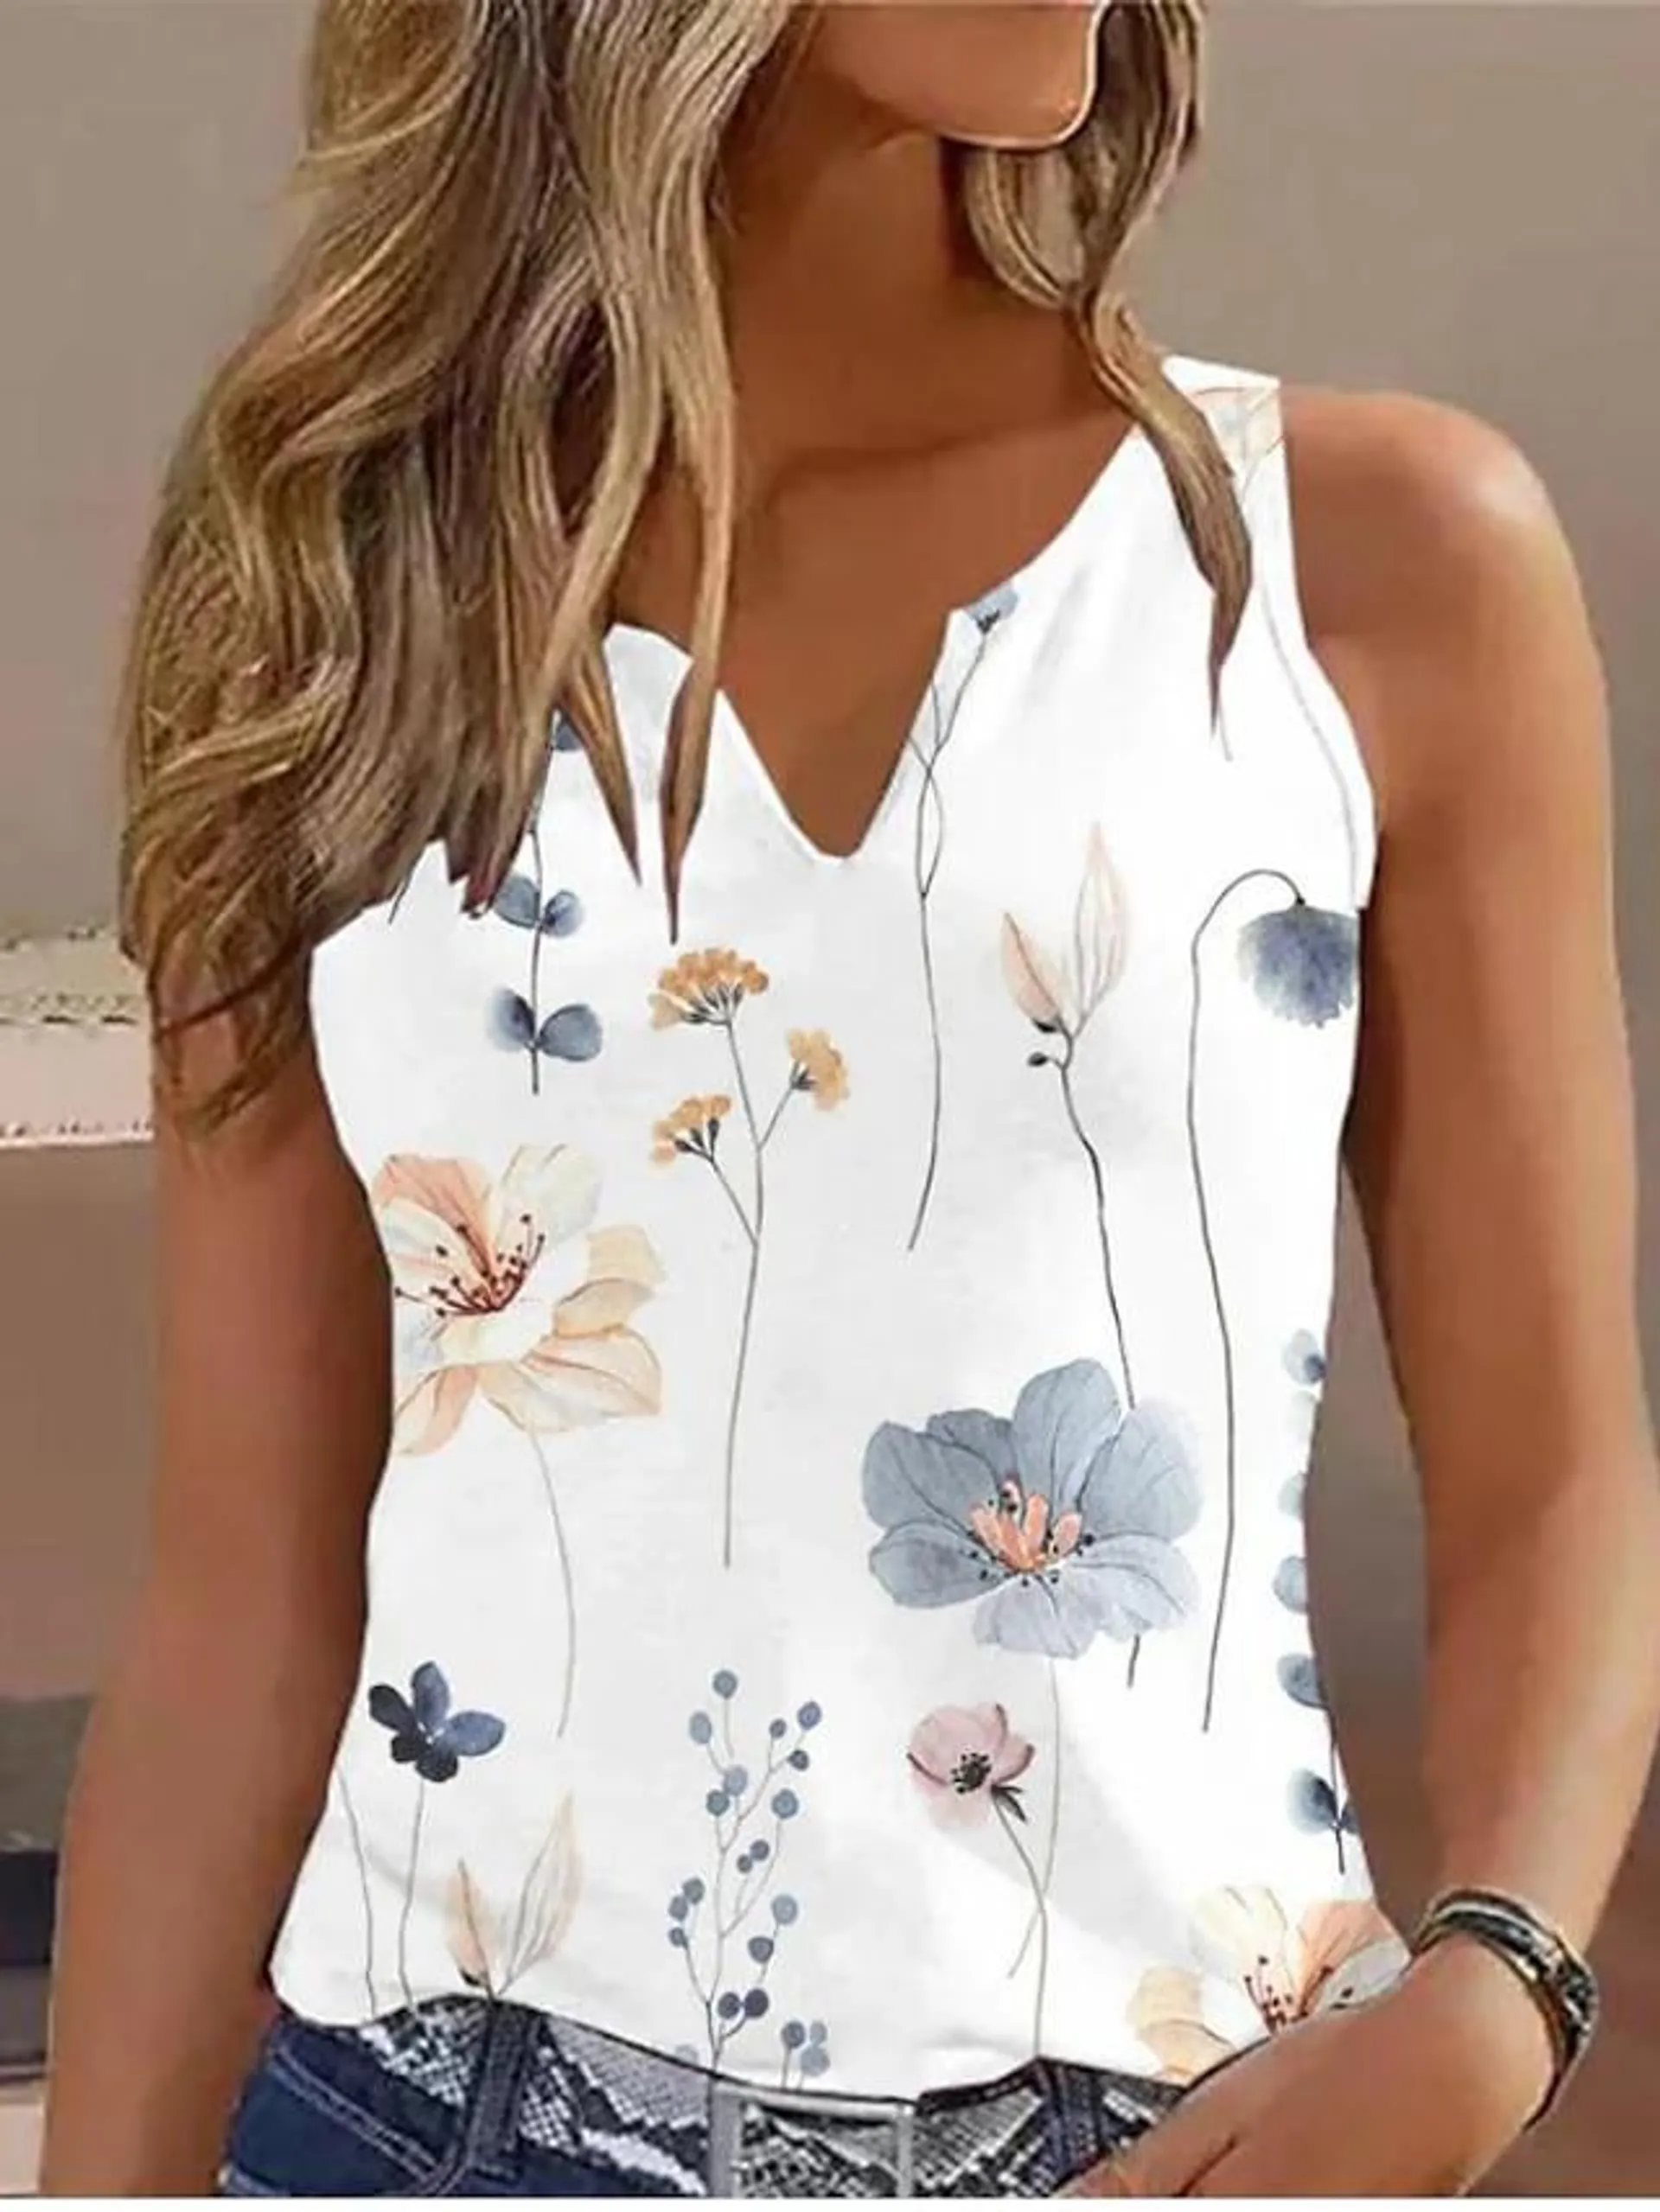 Women's Tank Top White Blue Gray Floral Print Sleeveless Casual Holiday Basic V Neck Regular Floral S